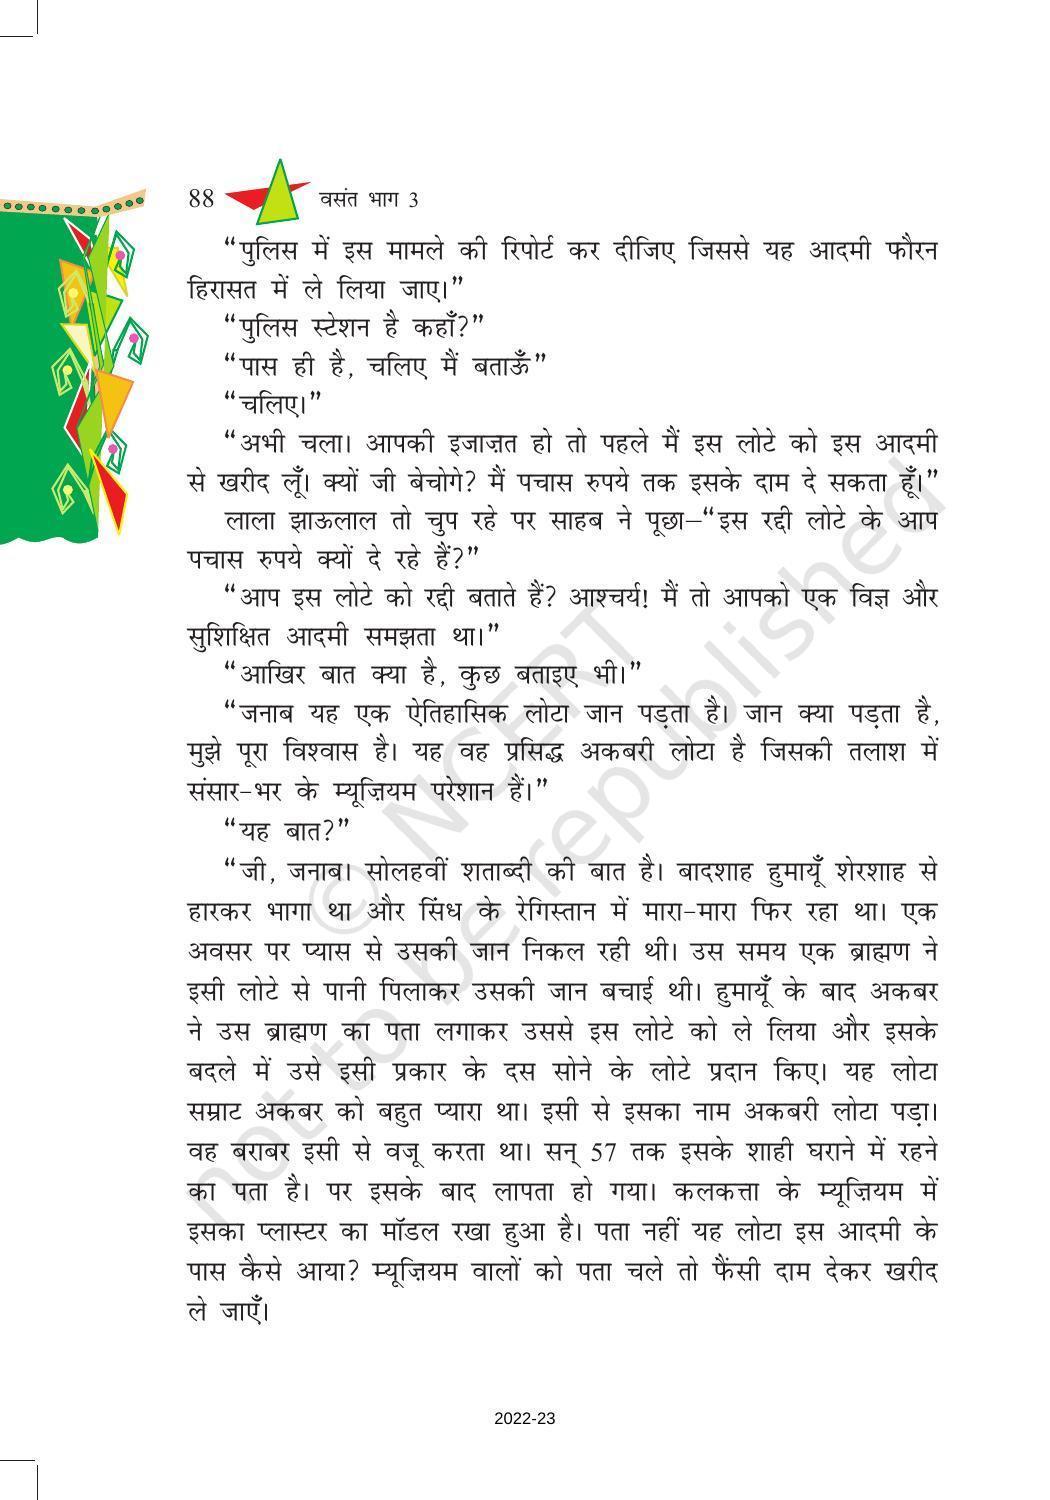 NCERT Book for Class 8 Hindi Vasant Chapter 14 अकबरी लोटा - Page 6